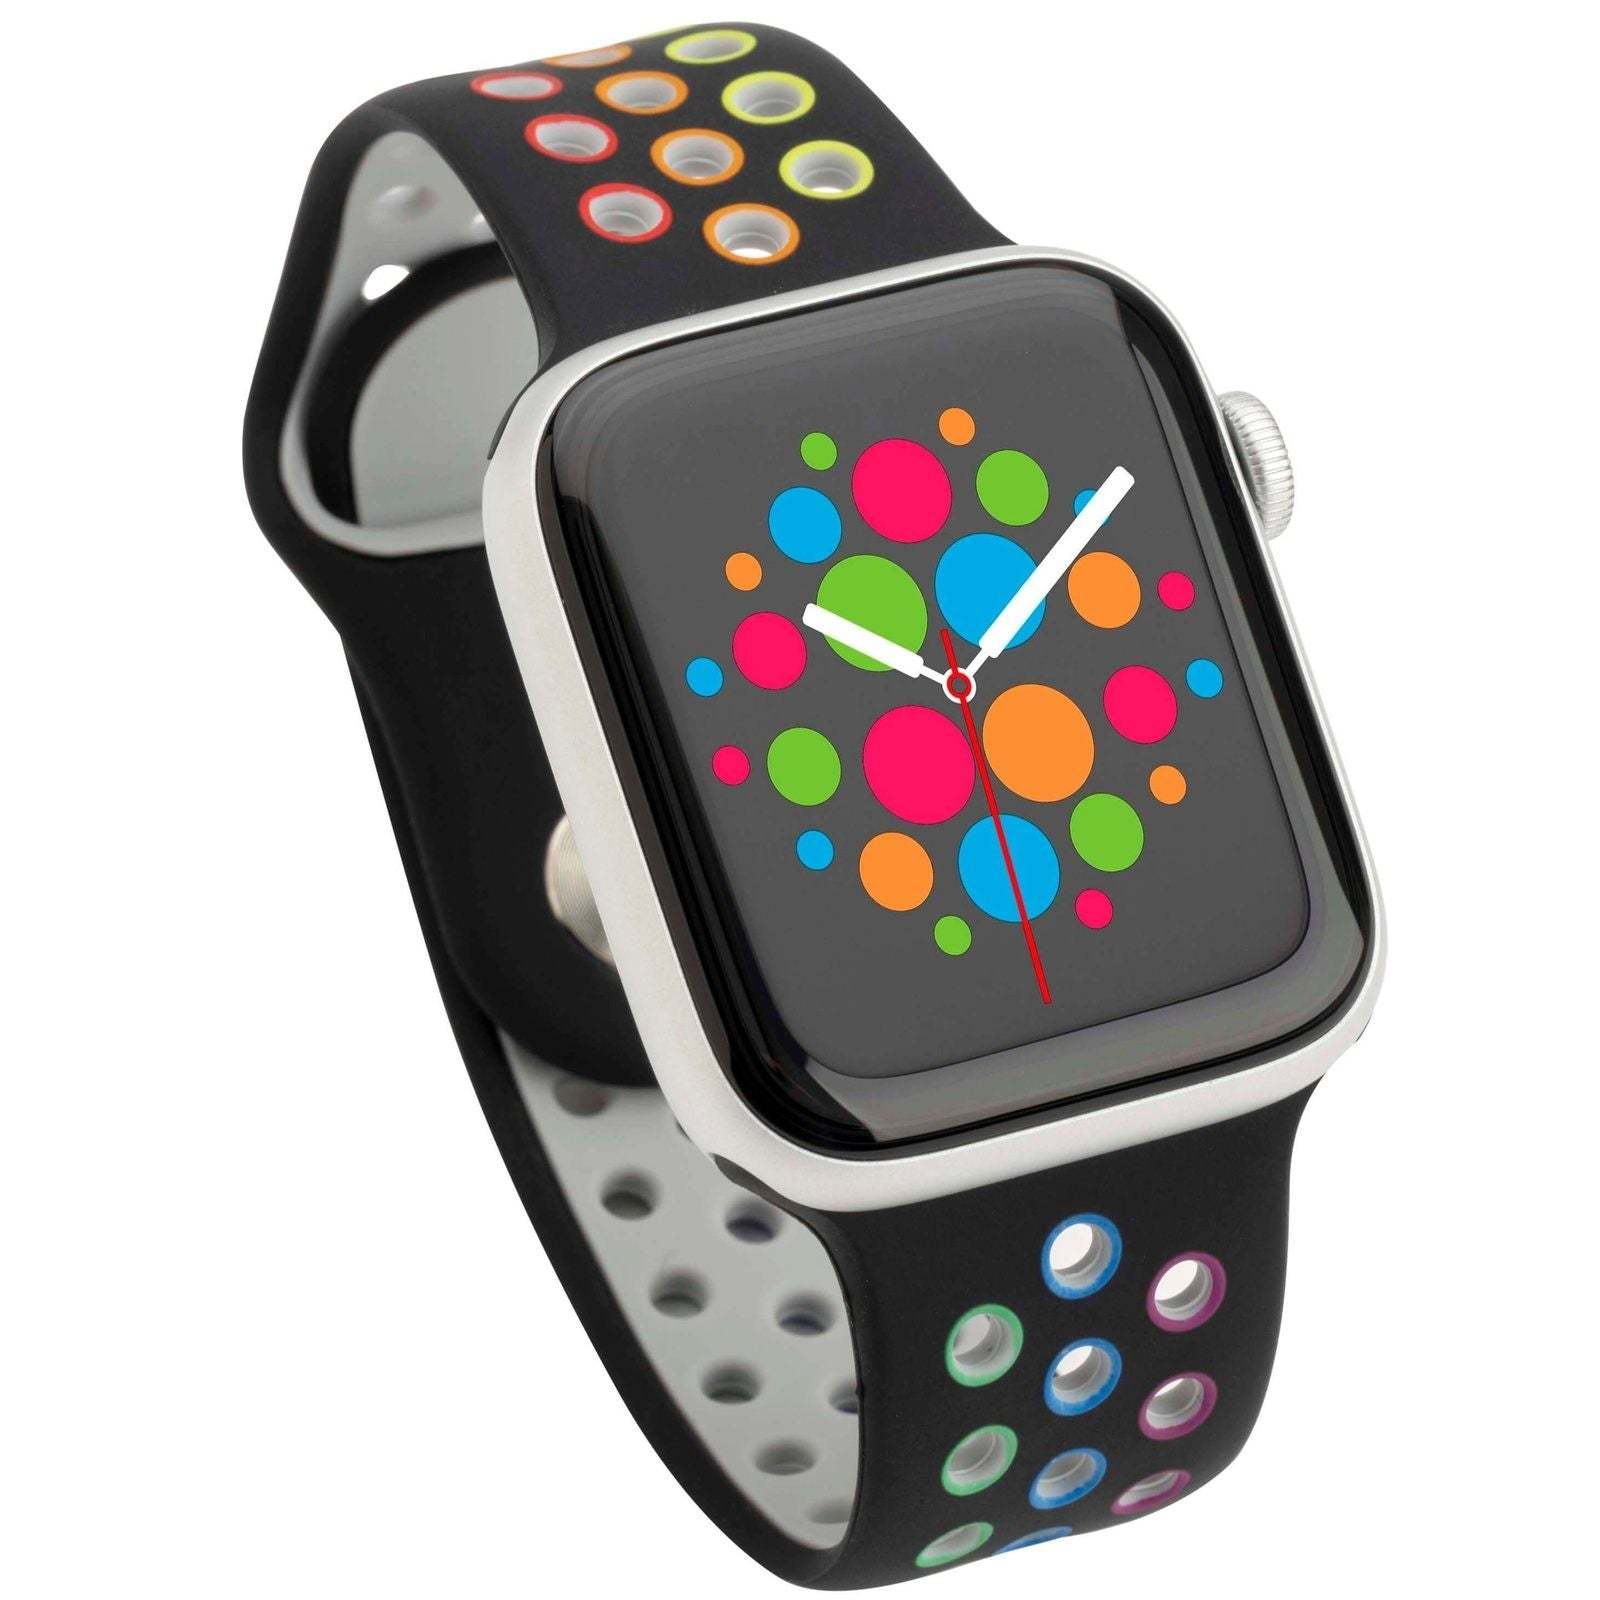 Apple Watch 42 Mm Stainless Steel With White Sport Band Stock Photo -  Download Image Now - iStock